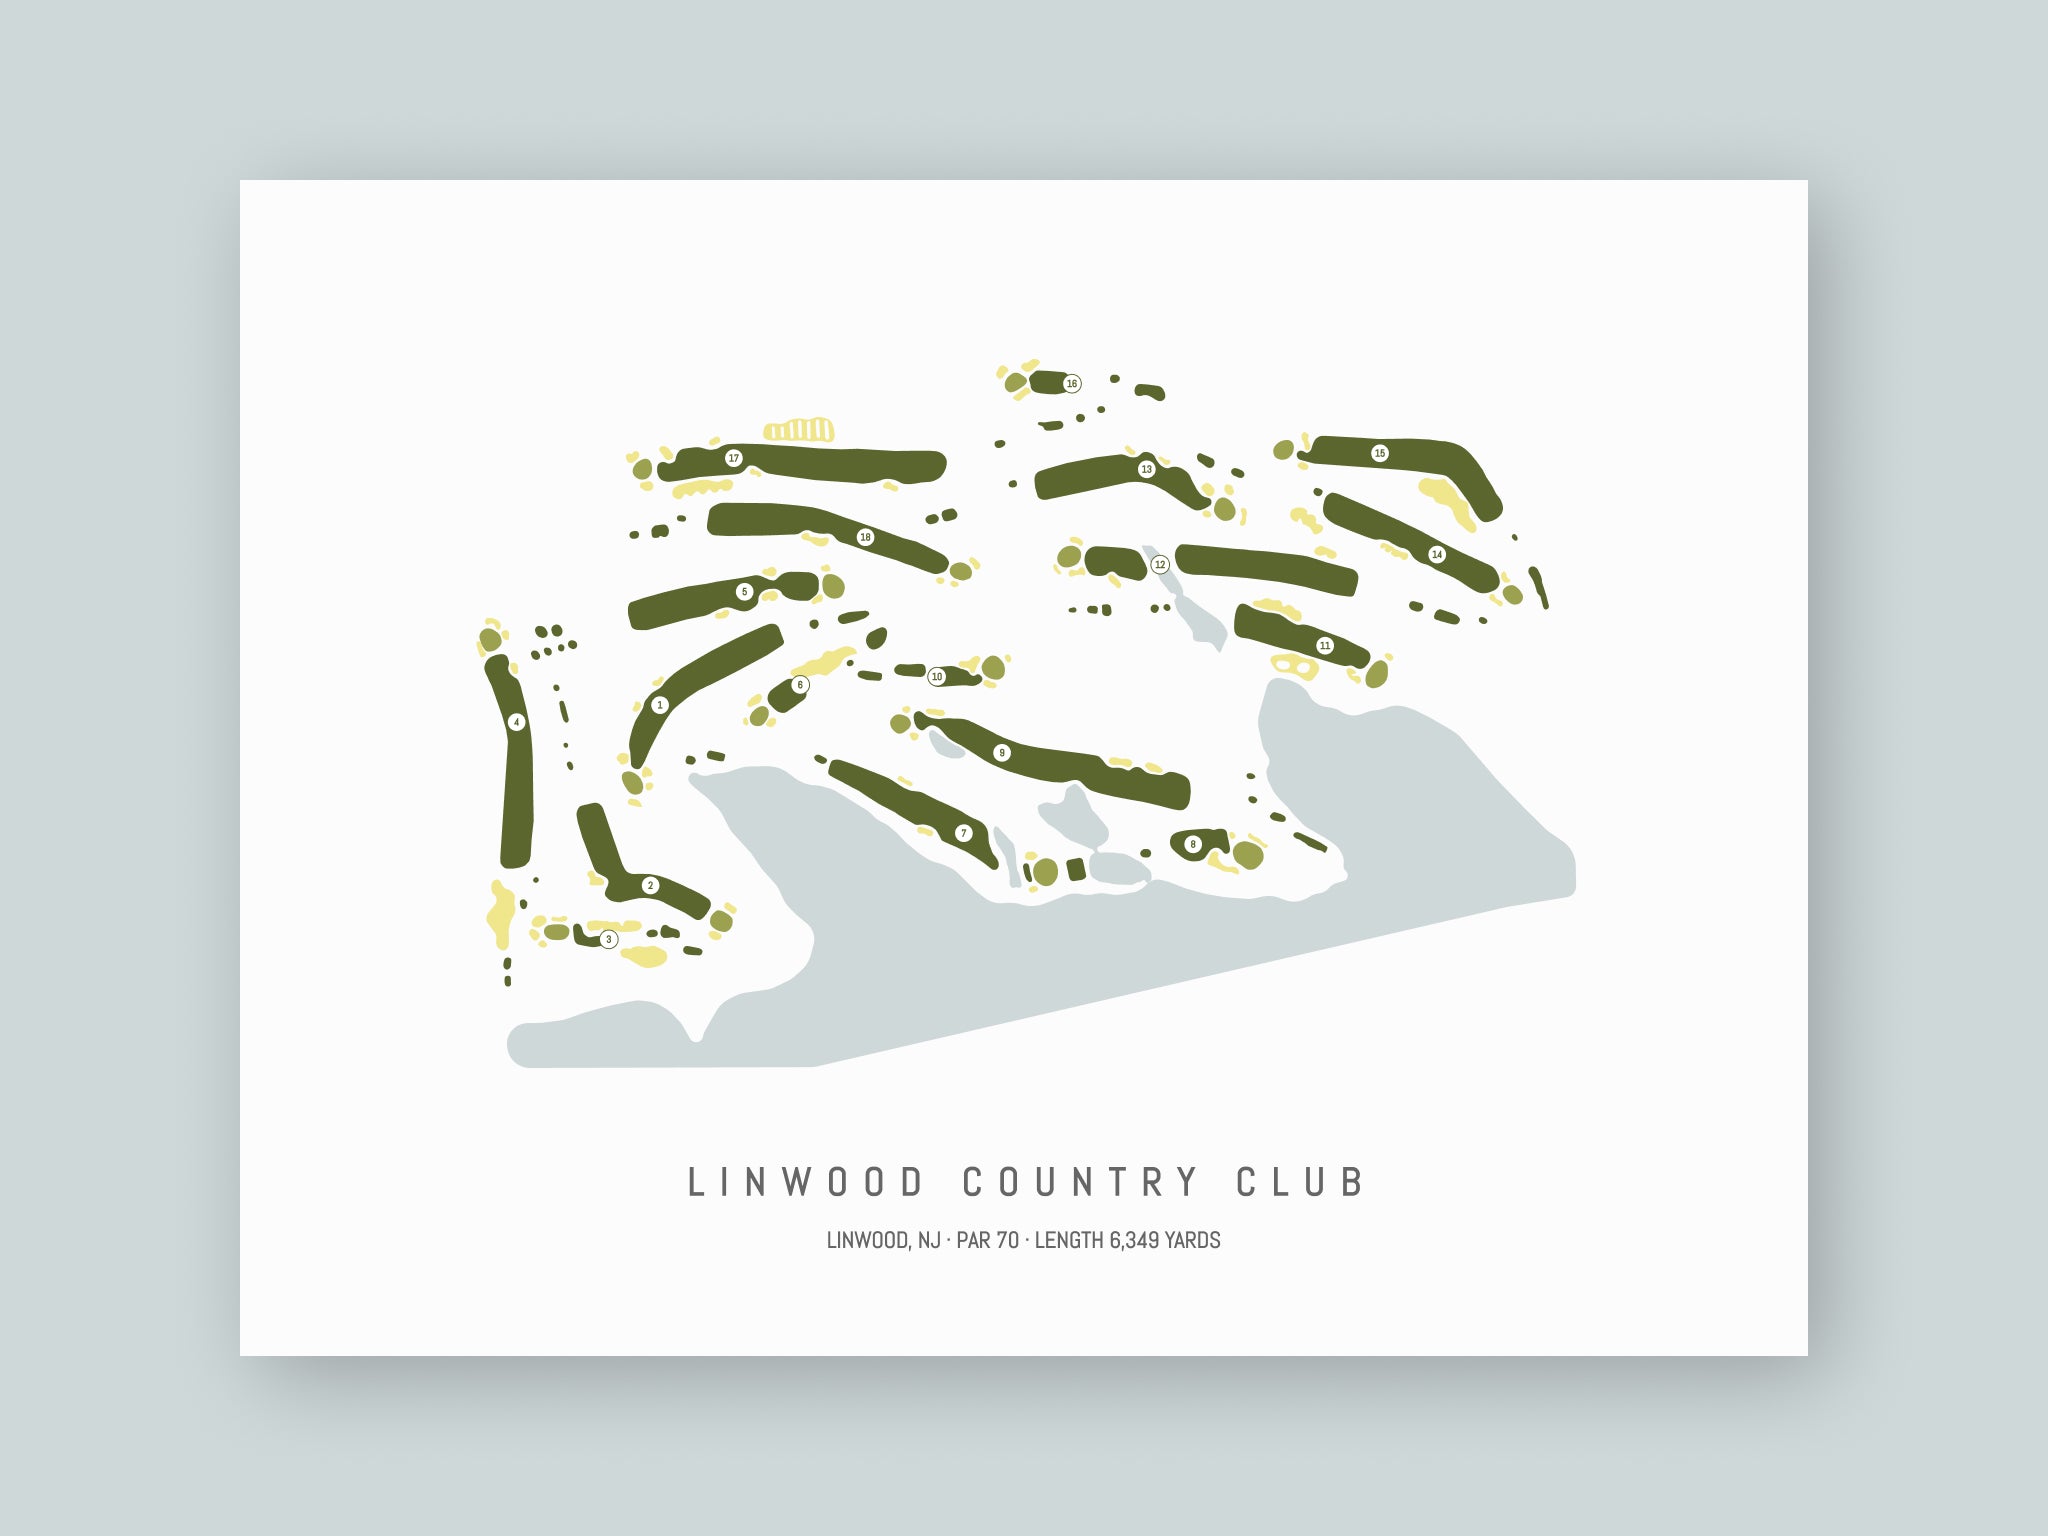 Linwood-Country-Club-NJ--Unframed-24x18-With-Hole-Numbers